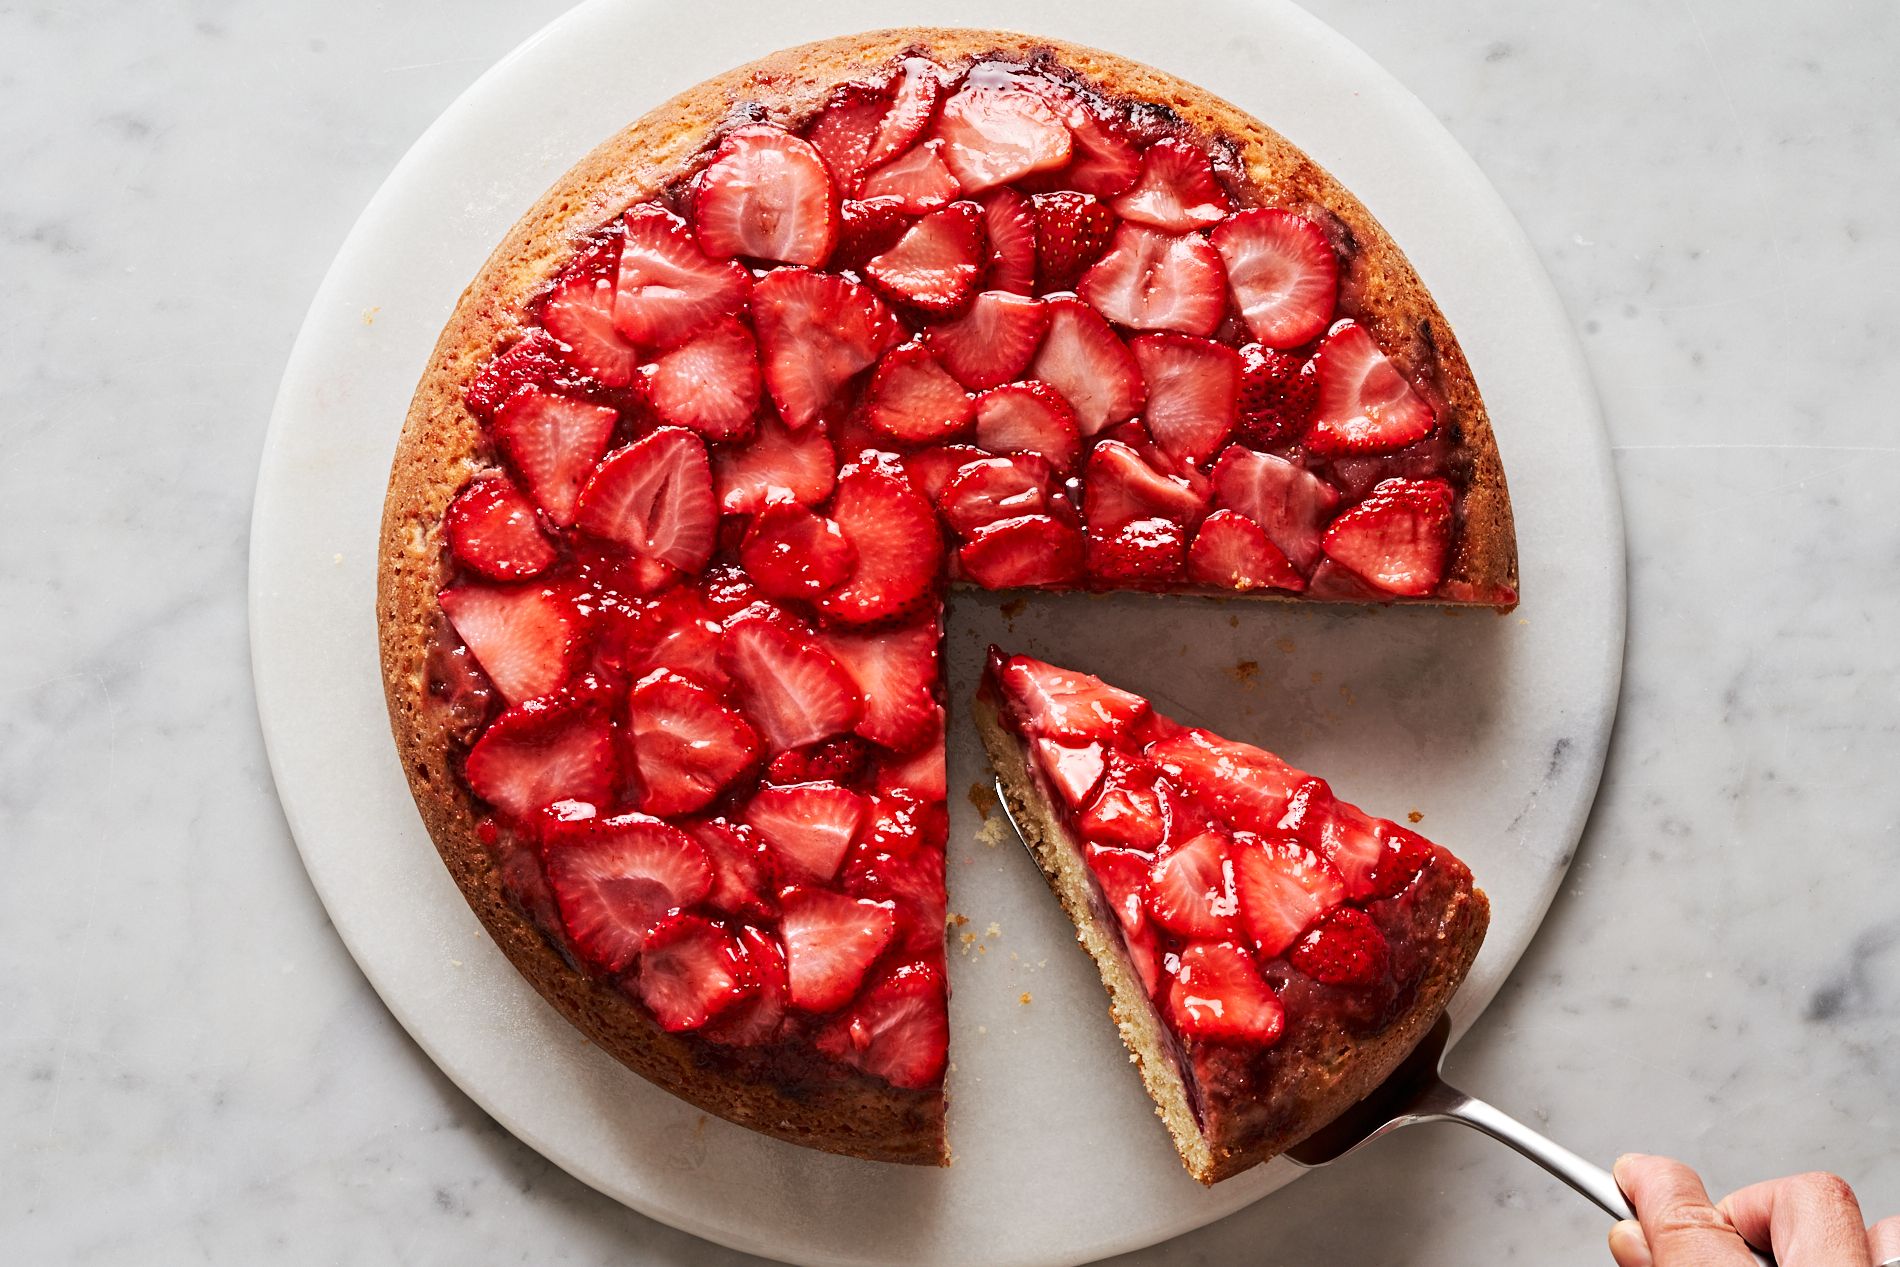 24 Best Strawberry Desserts (+ Easy Recipes) - Insanely Good